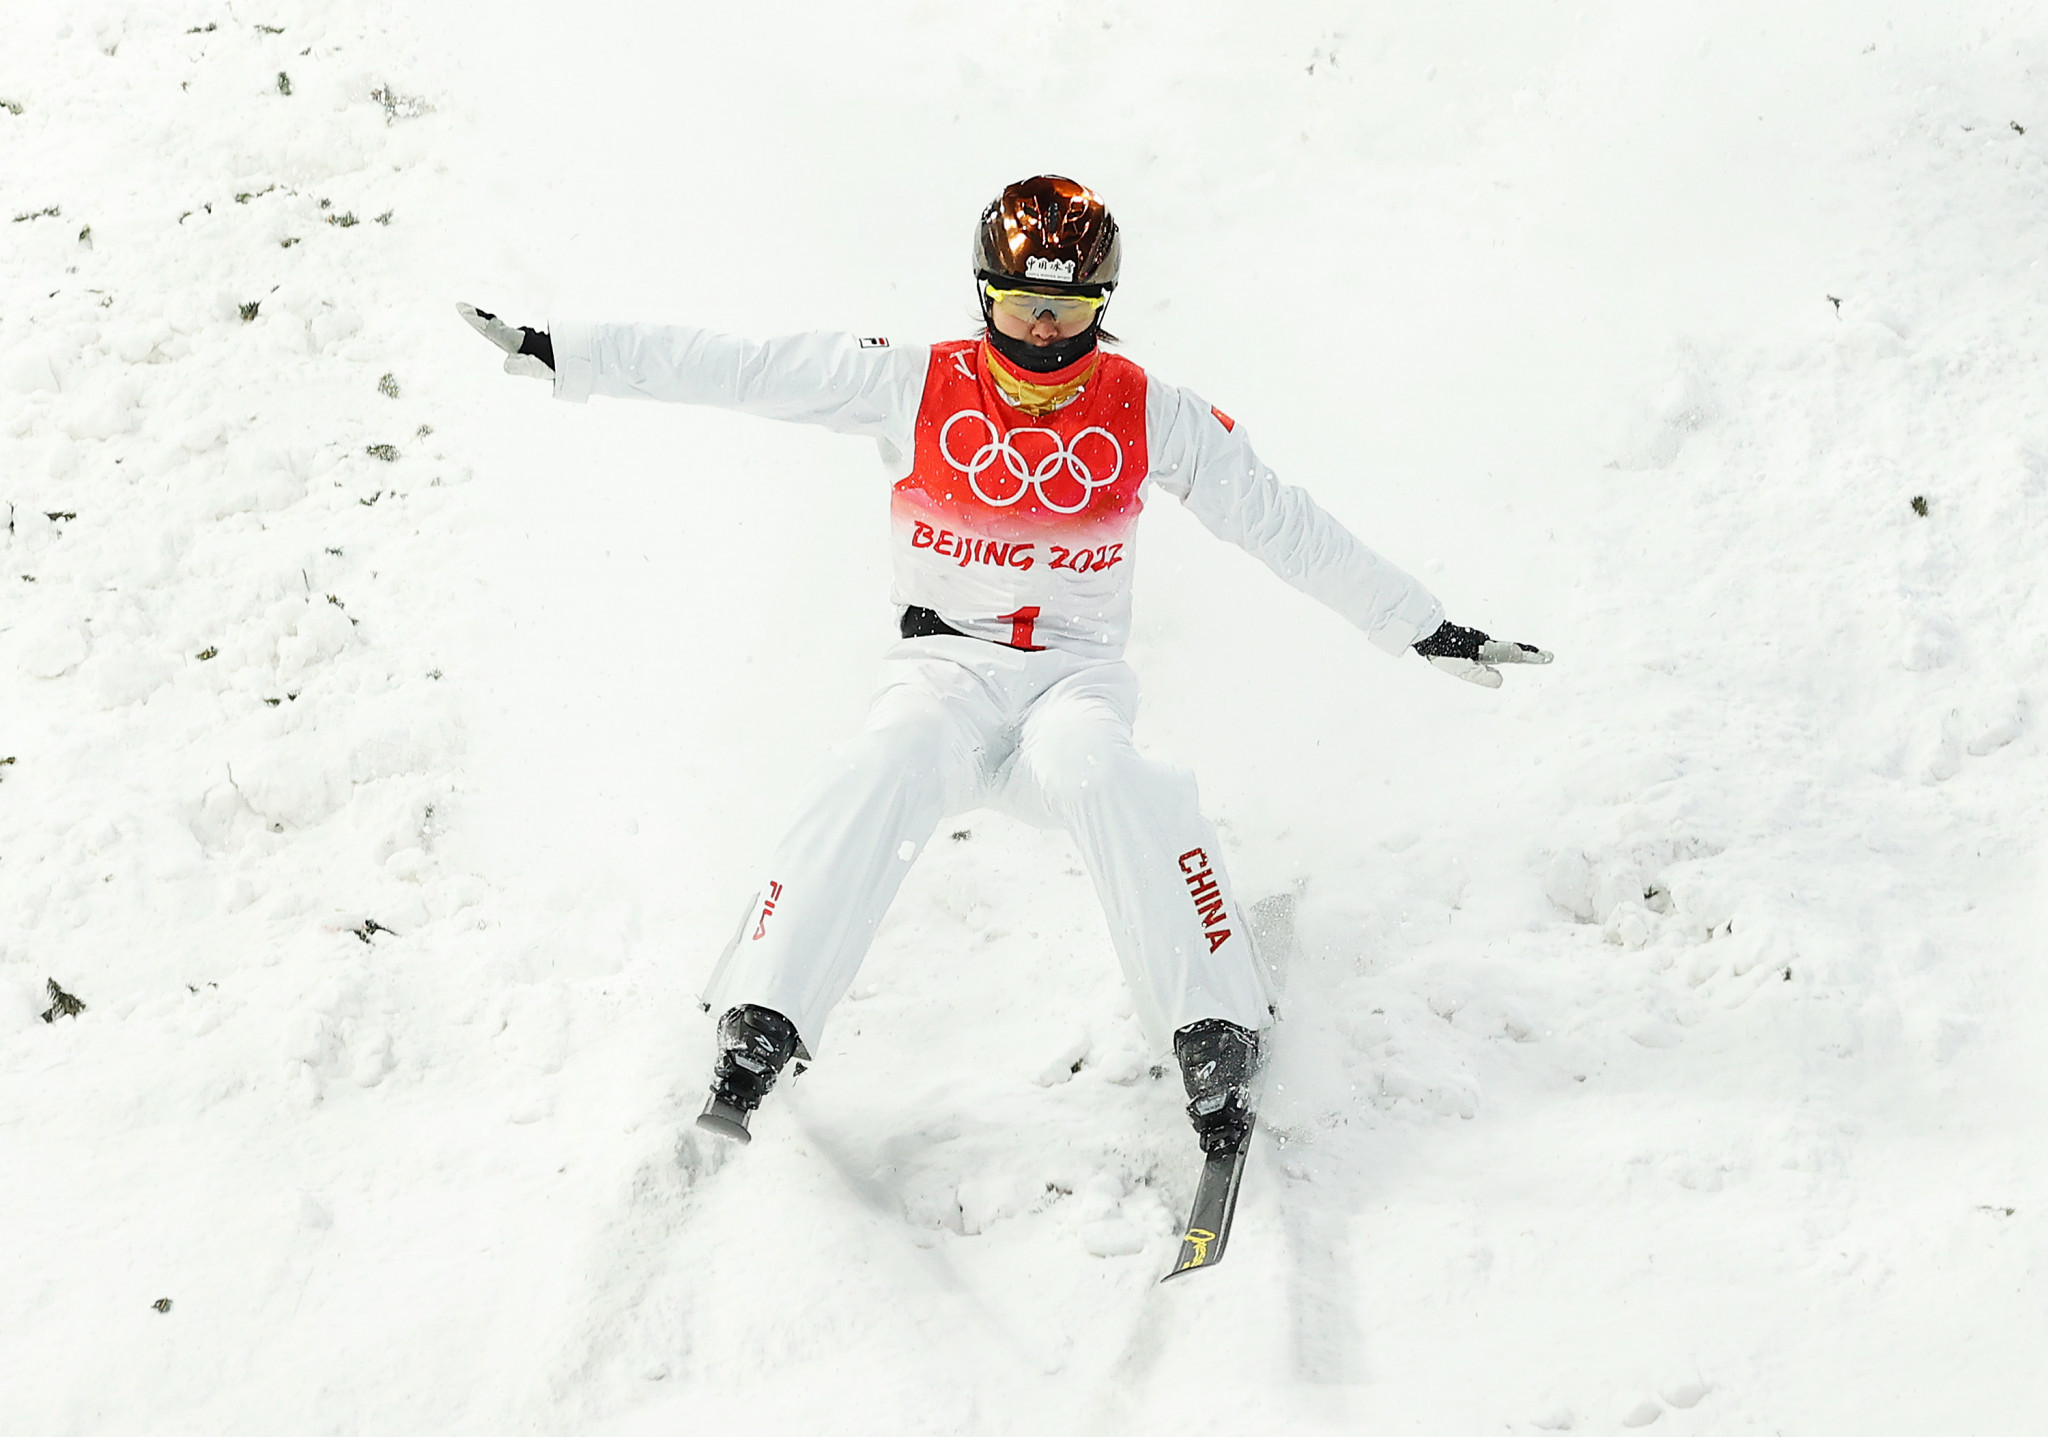 Xu Mengtao won women's aerials gold for China at the Beijing 2022 Winter Olympics ©Getty Images